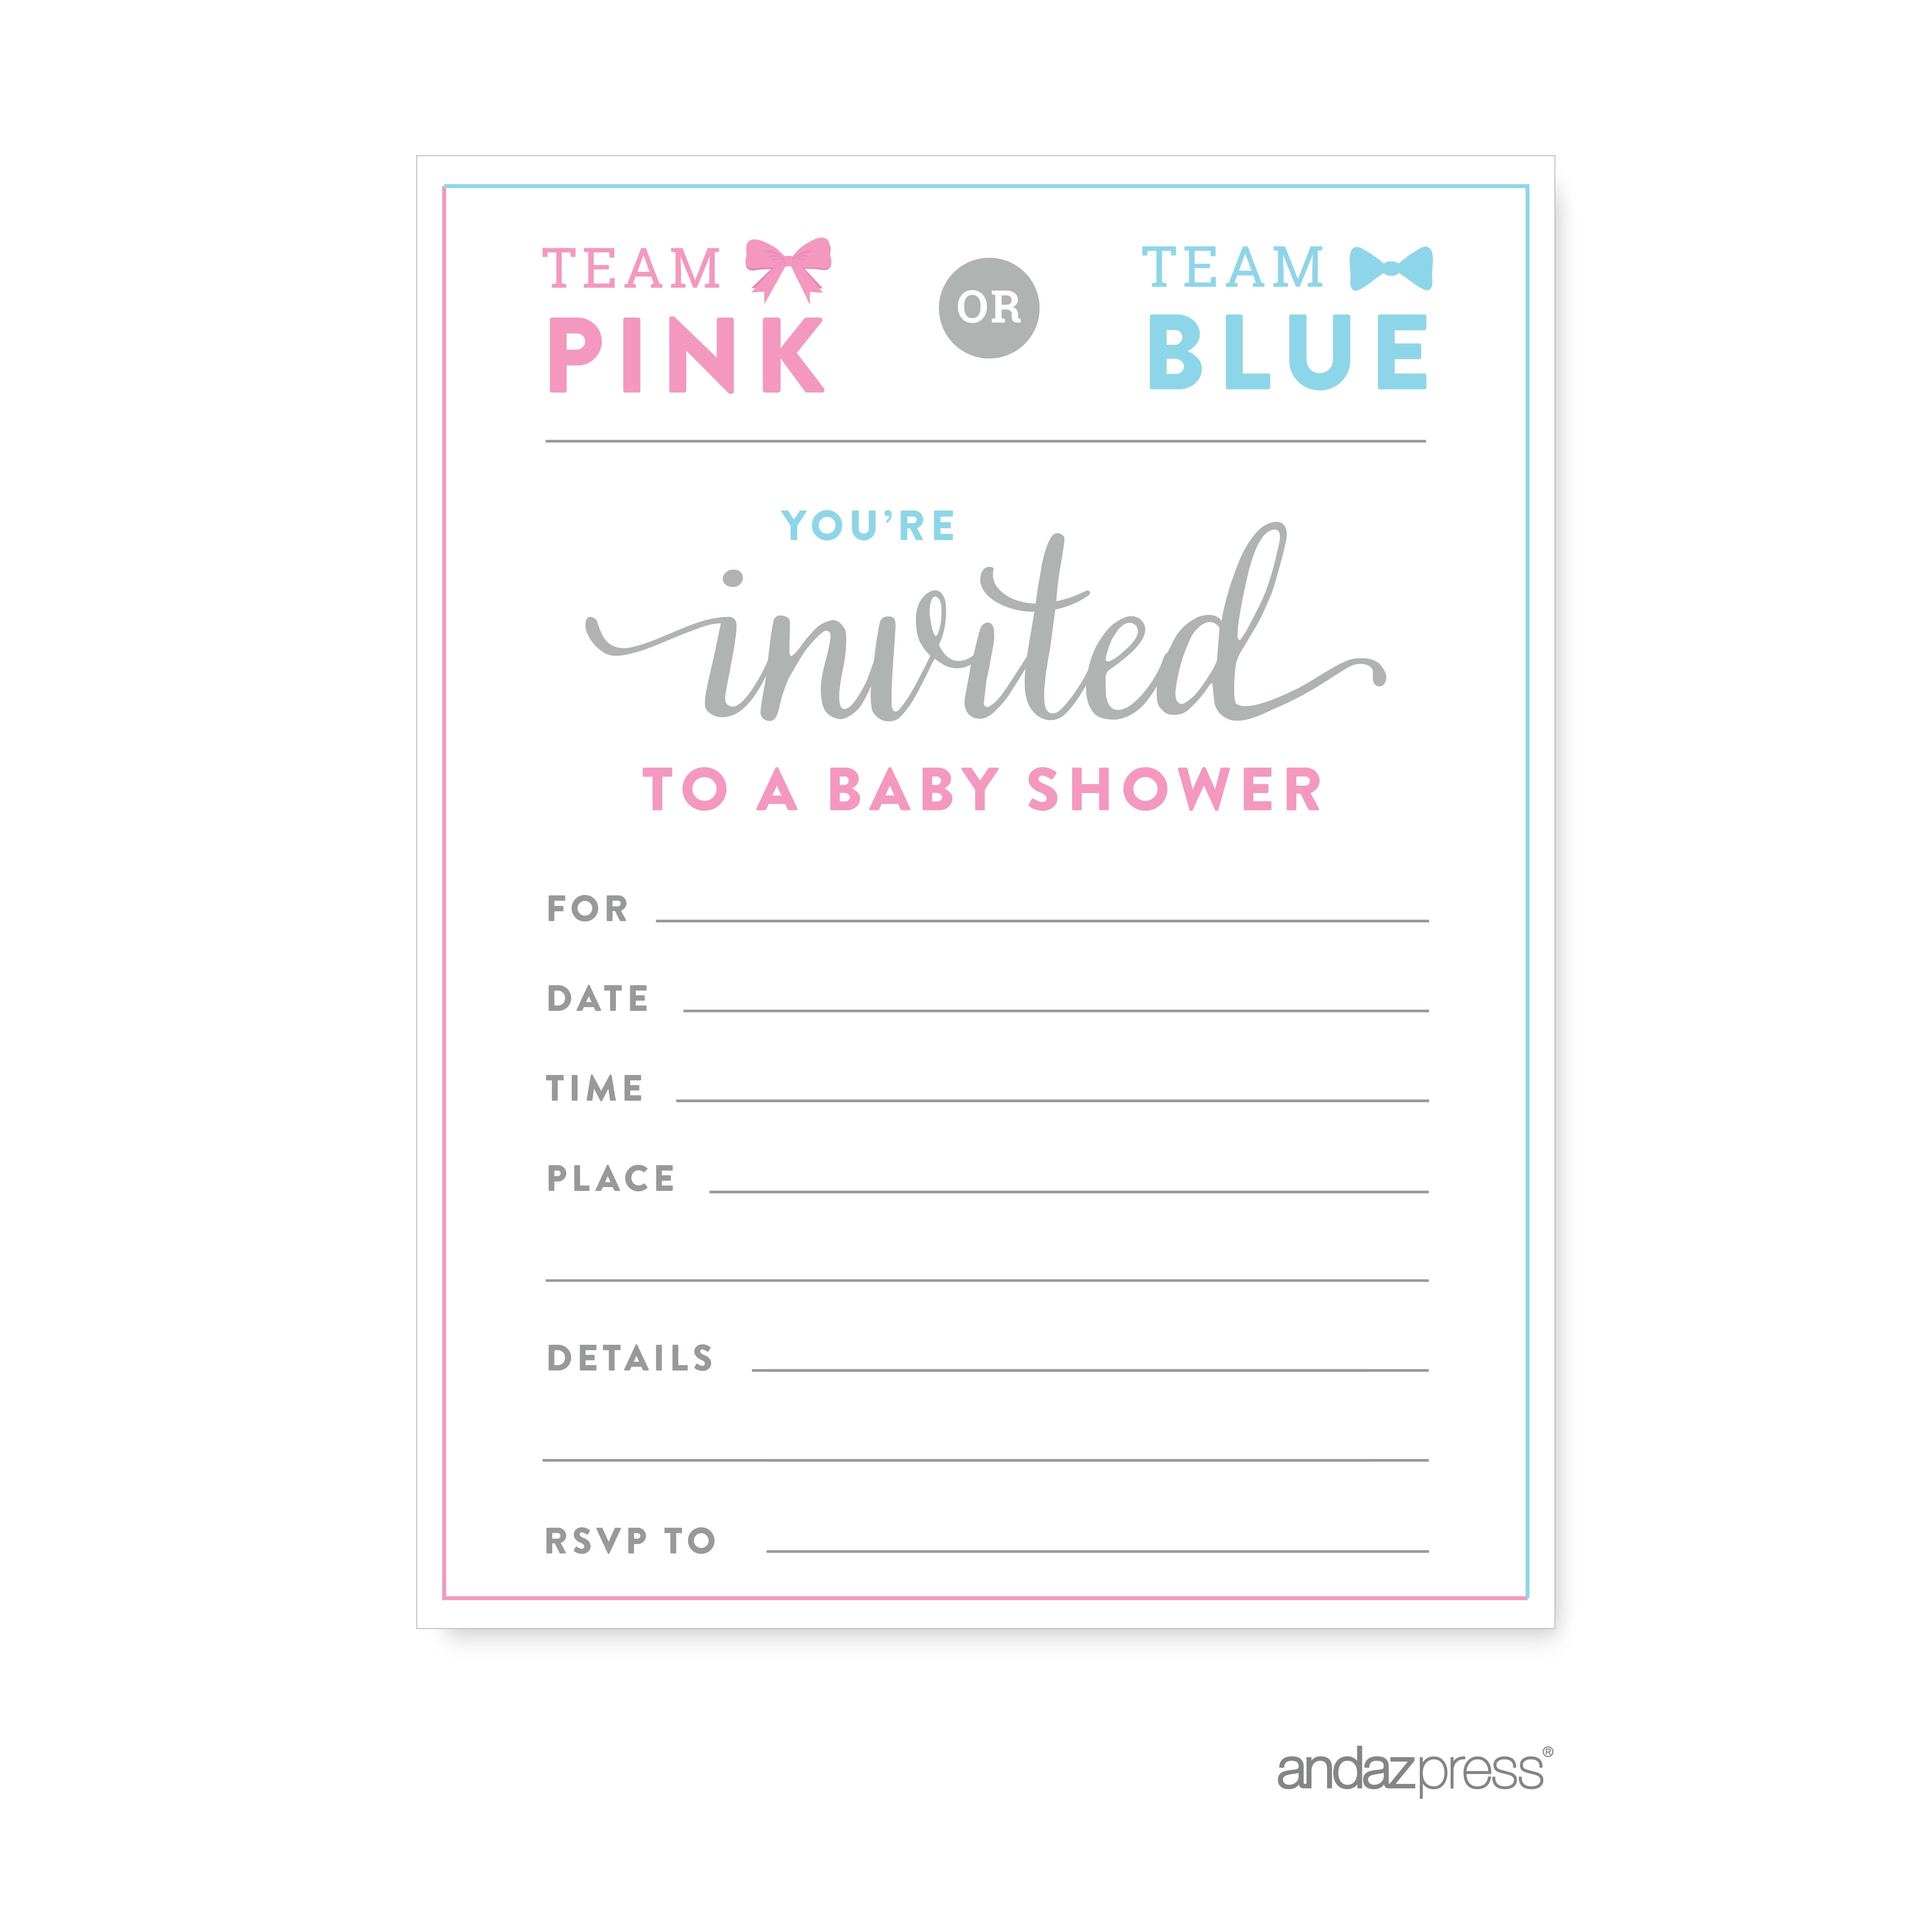 blue or neutral dot designs Baby shower invitations pack of 16 pink 